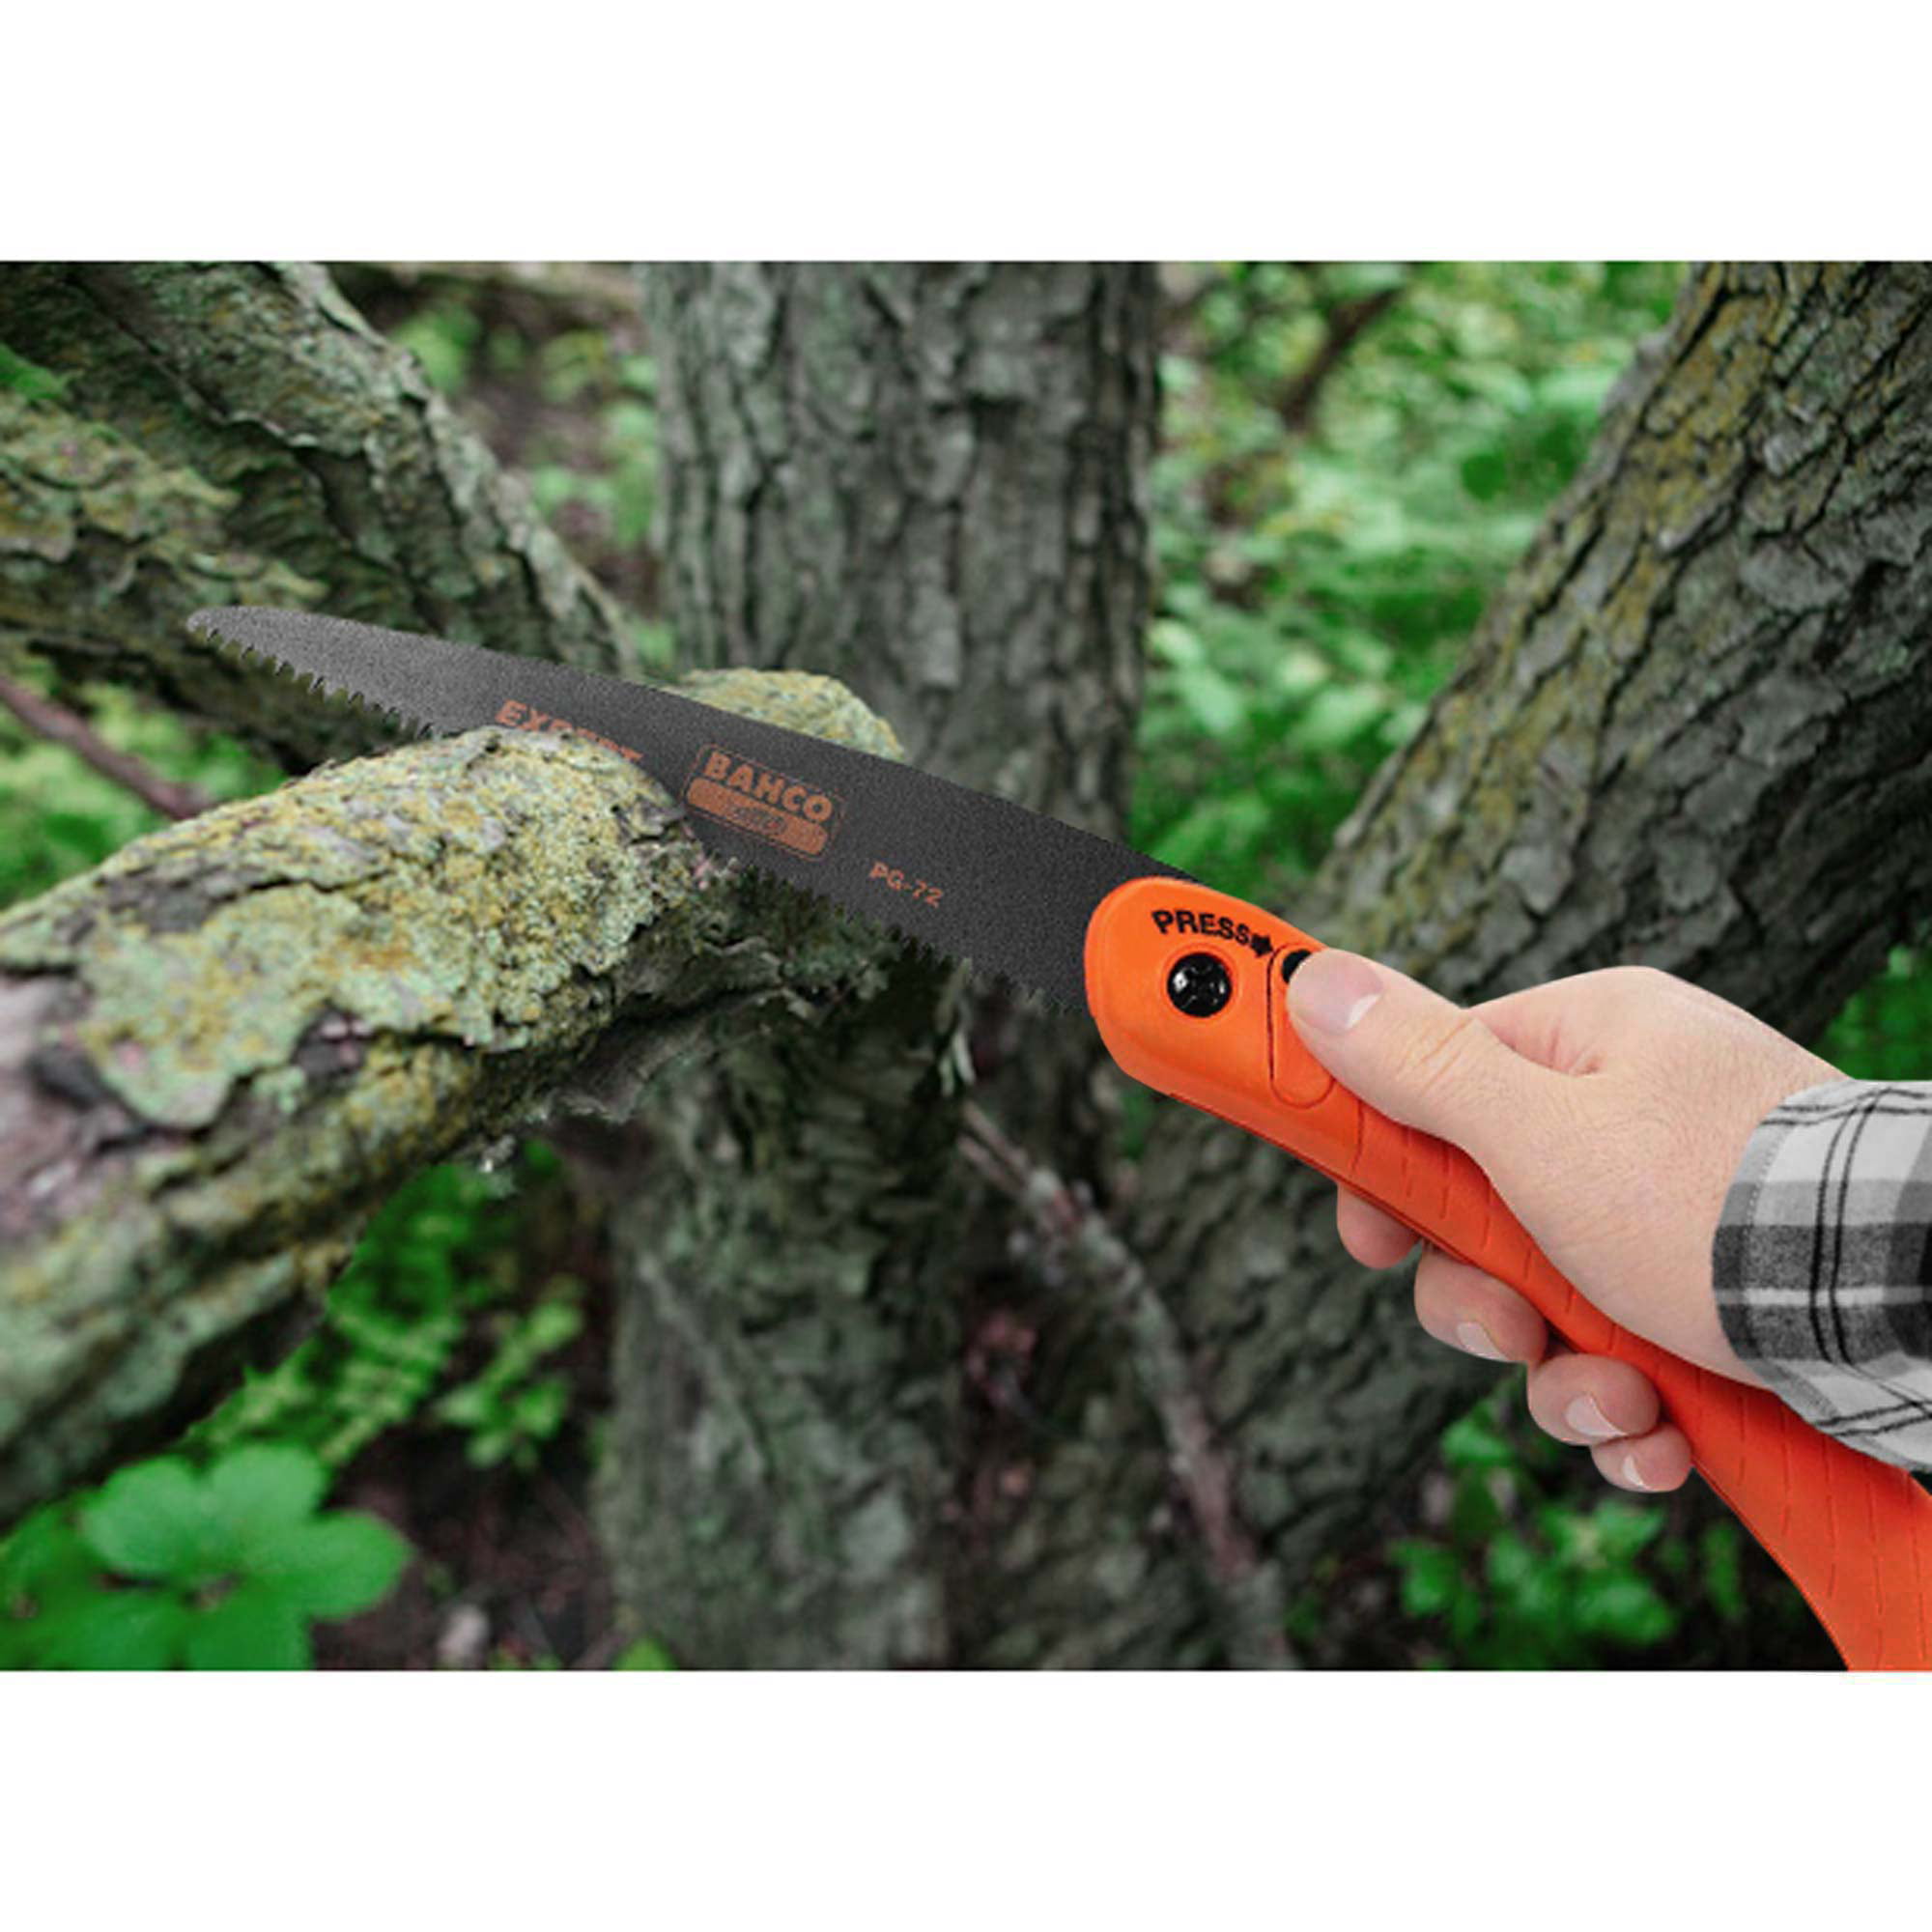 7 Teeth Per Inch Bahco PG-72 DIY Foldable Pruning Saw with Low Friction Blade 